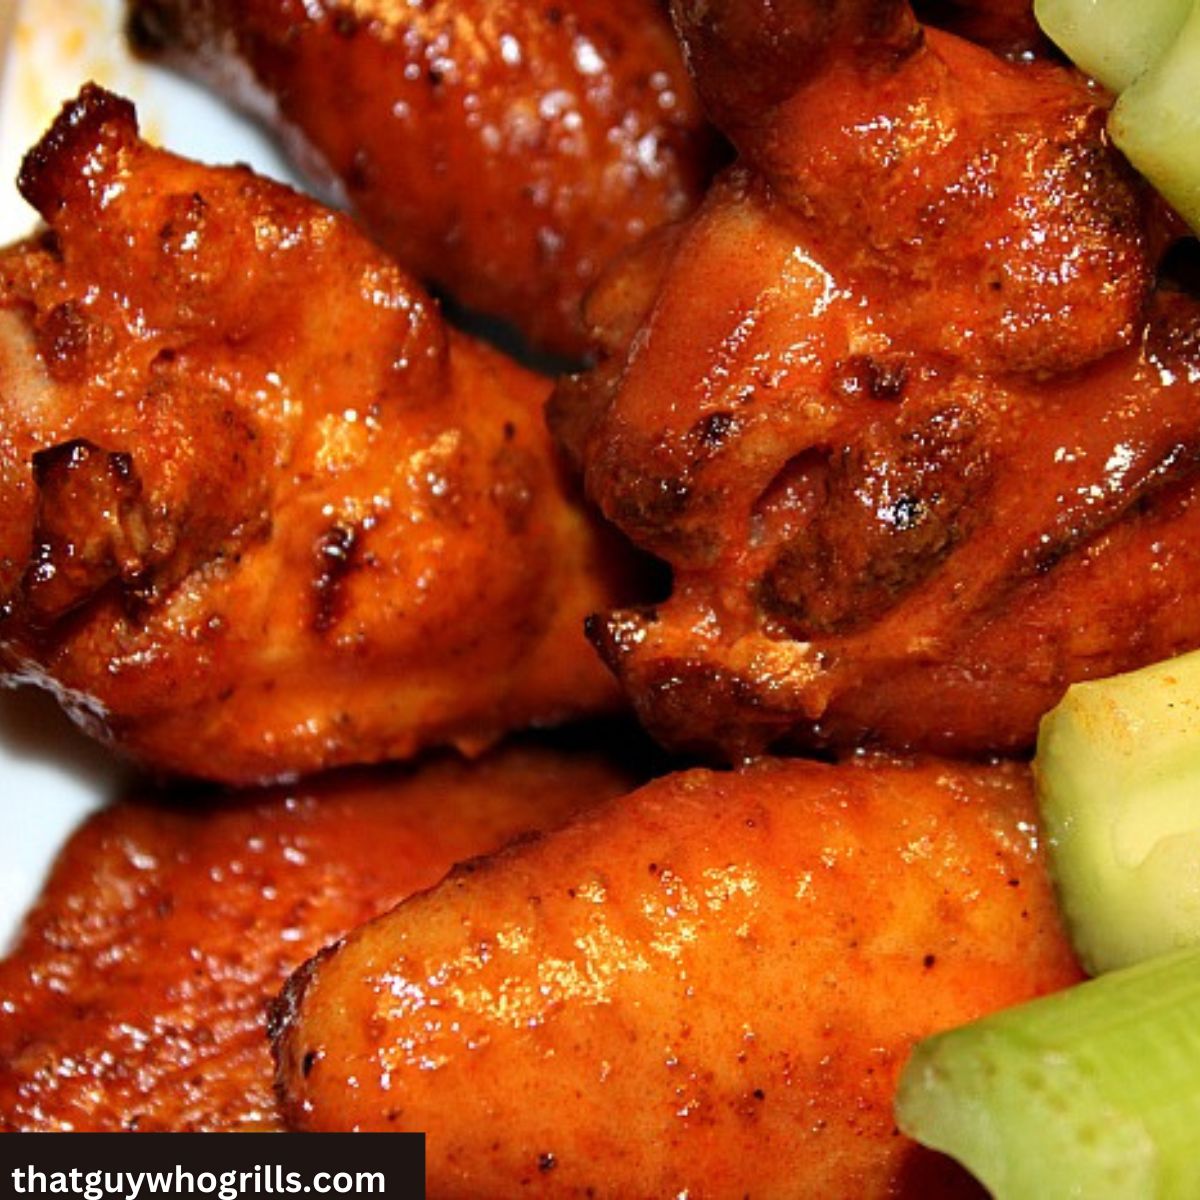 Sauced spicy smoked chicken wings with celery